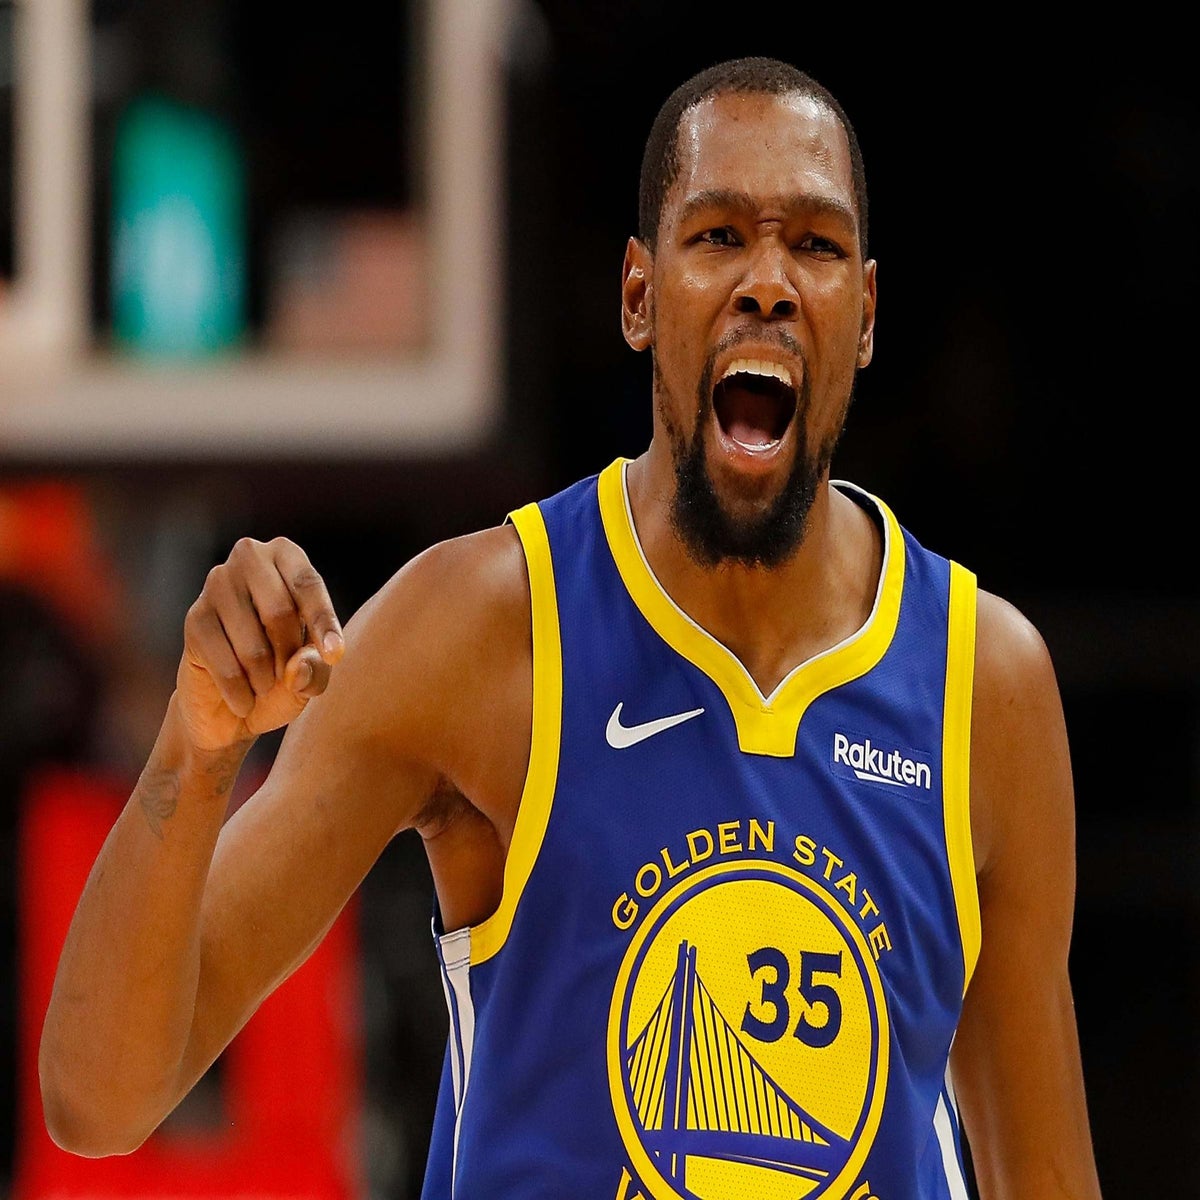 NBA: Kevin Durant agrees to sign with Warriors